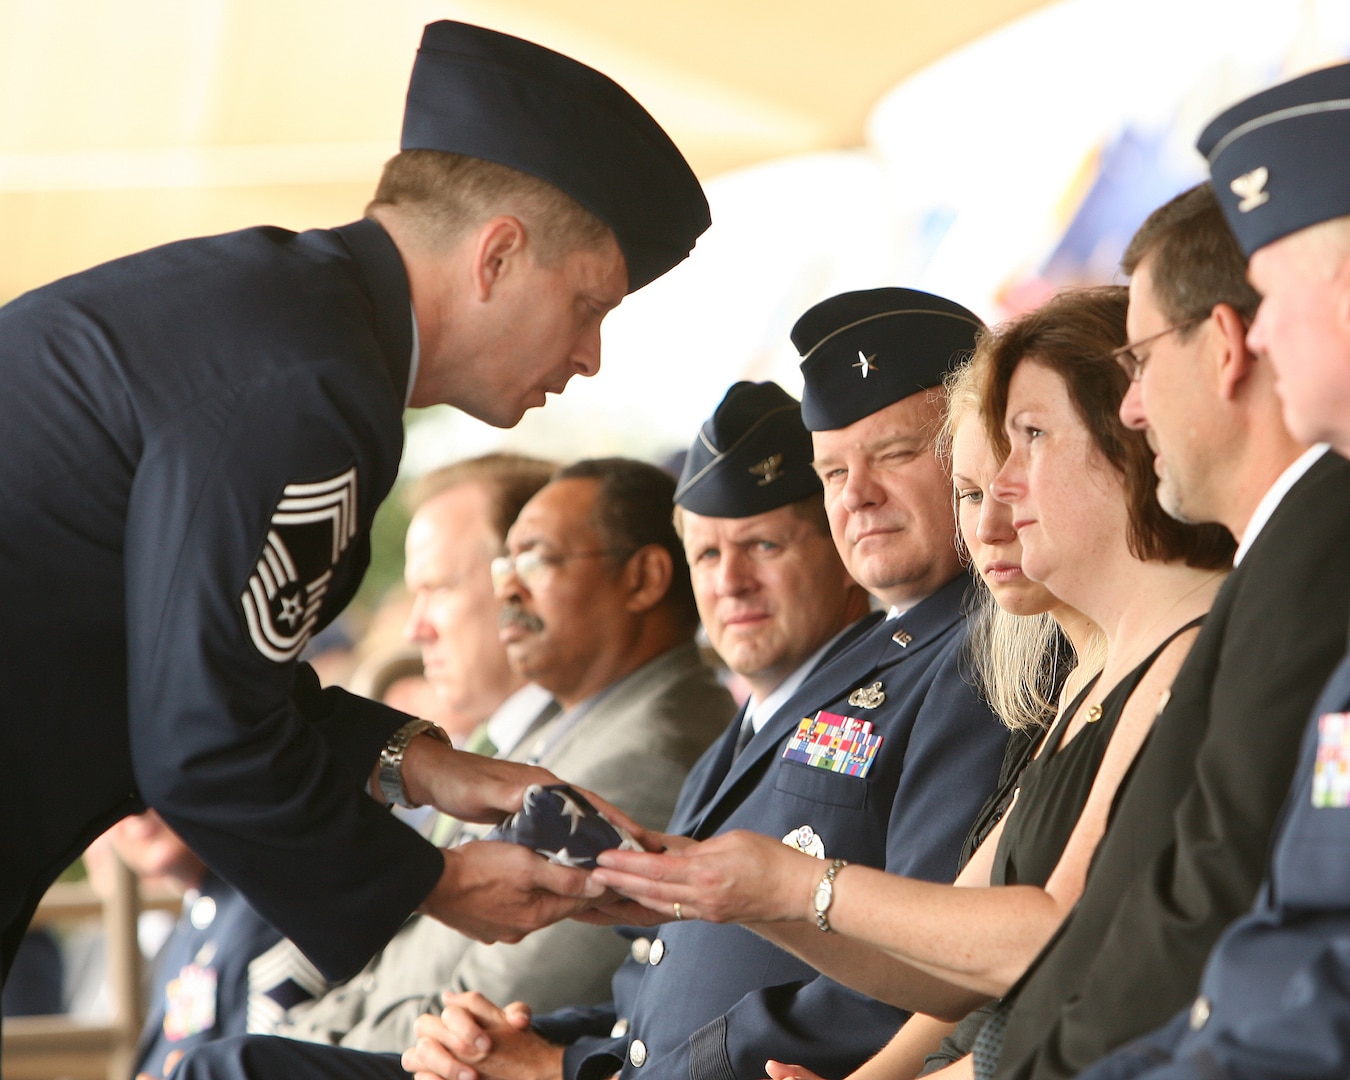 On behalf of a grateful nation,  Chief Master Sgt. Michael Tanguay, superintendent of the Air Force Office of Special Investigations 3rd Field Investigations Region, presents a folded American flag to Donna Kuglics, the mother of Special Agent Matthew Kuglics, during a memorial ceremony June 18 at Lackland Air Force Base, Texas. Agent Kuglics was killed in action by an improvised explosive while supporting Operation Iraqi Freedom. (USAF photo by Robbin Cresswell)